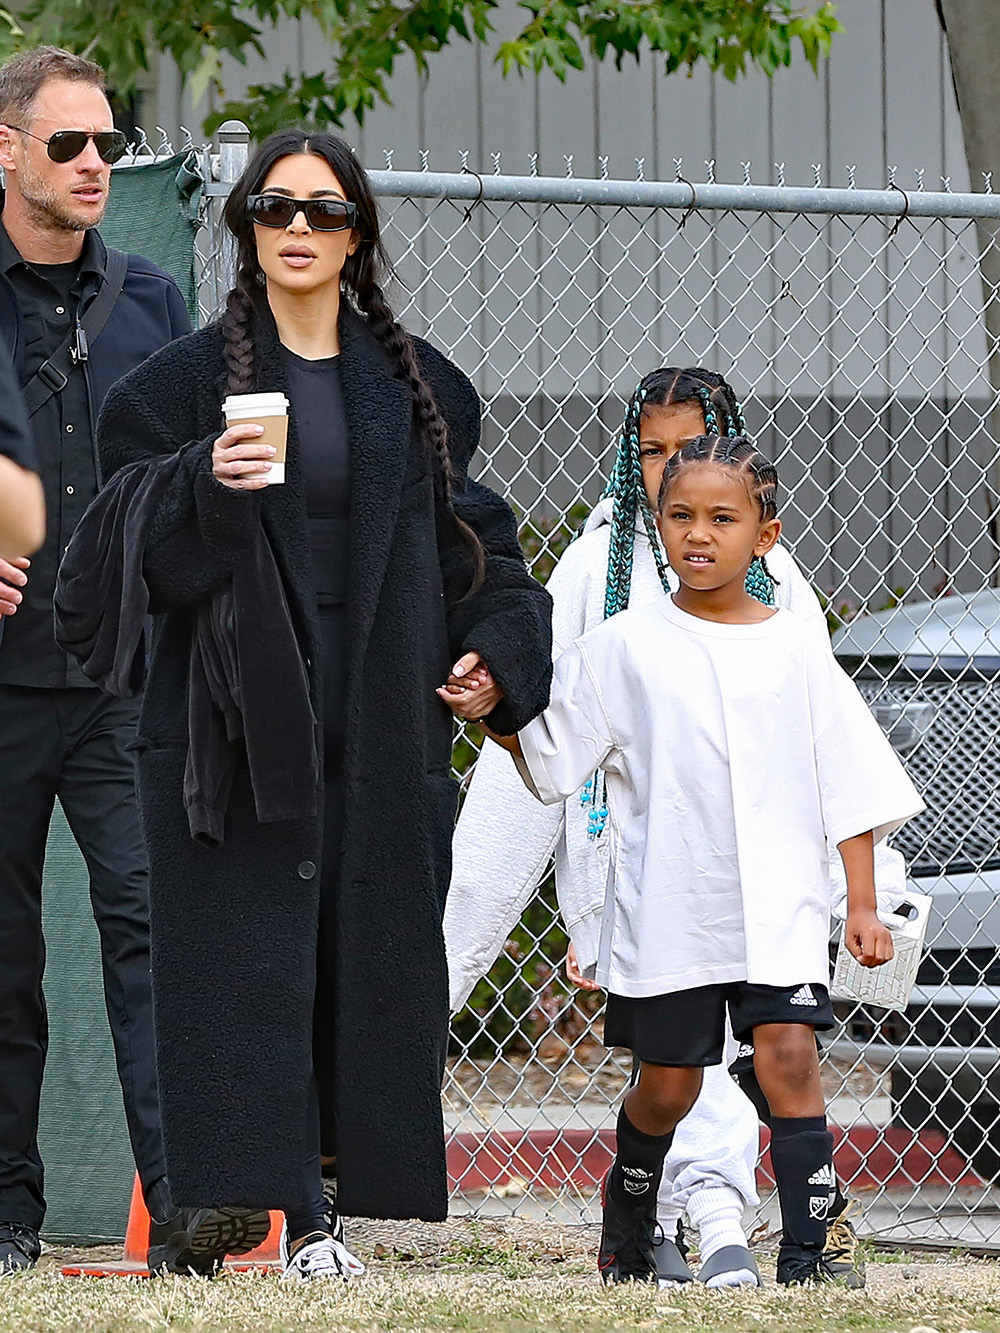 Kim Kardashian reveals North West is watching from car…